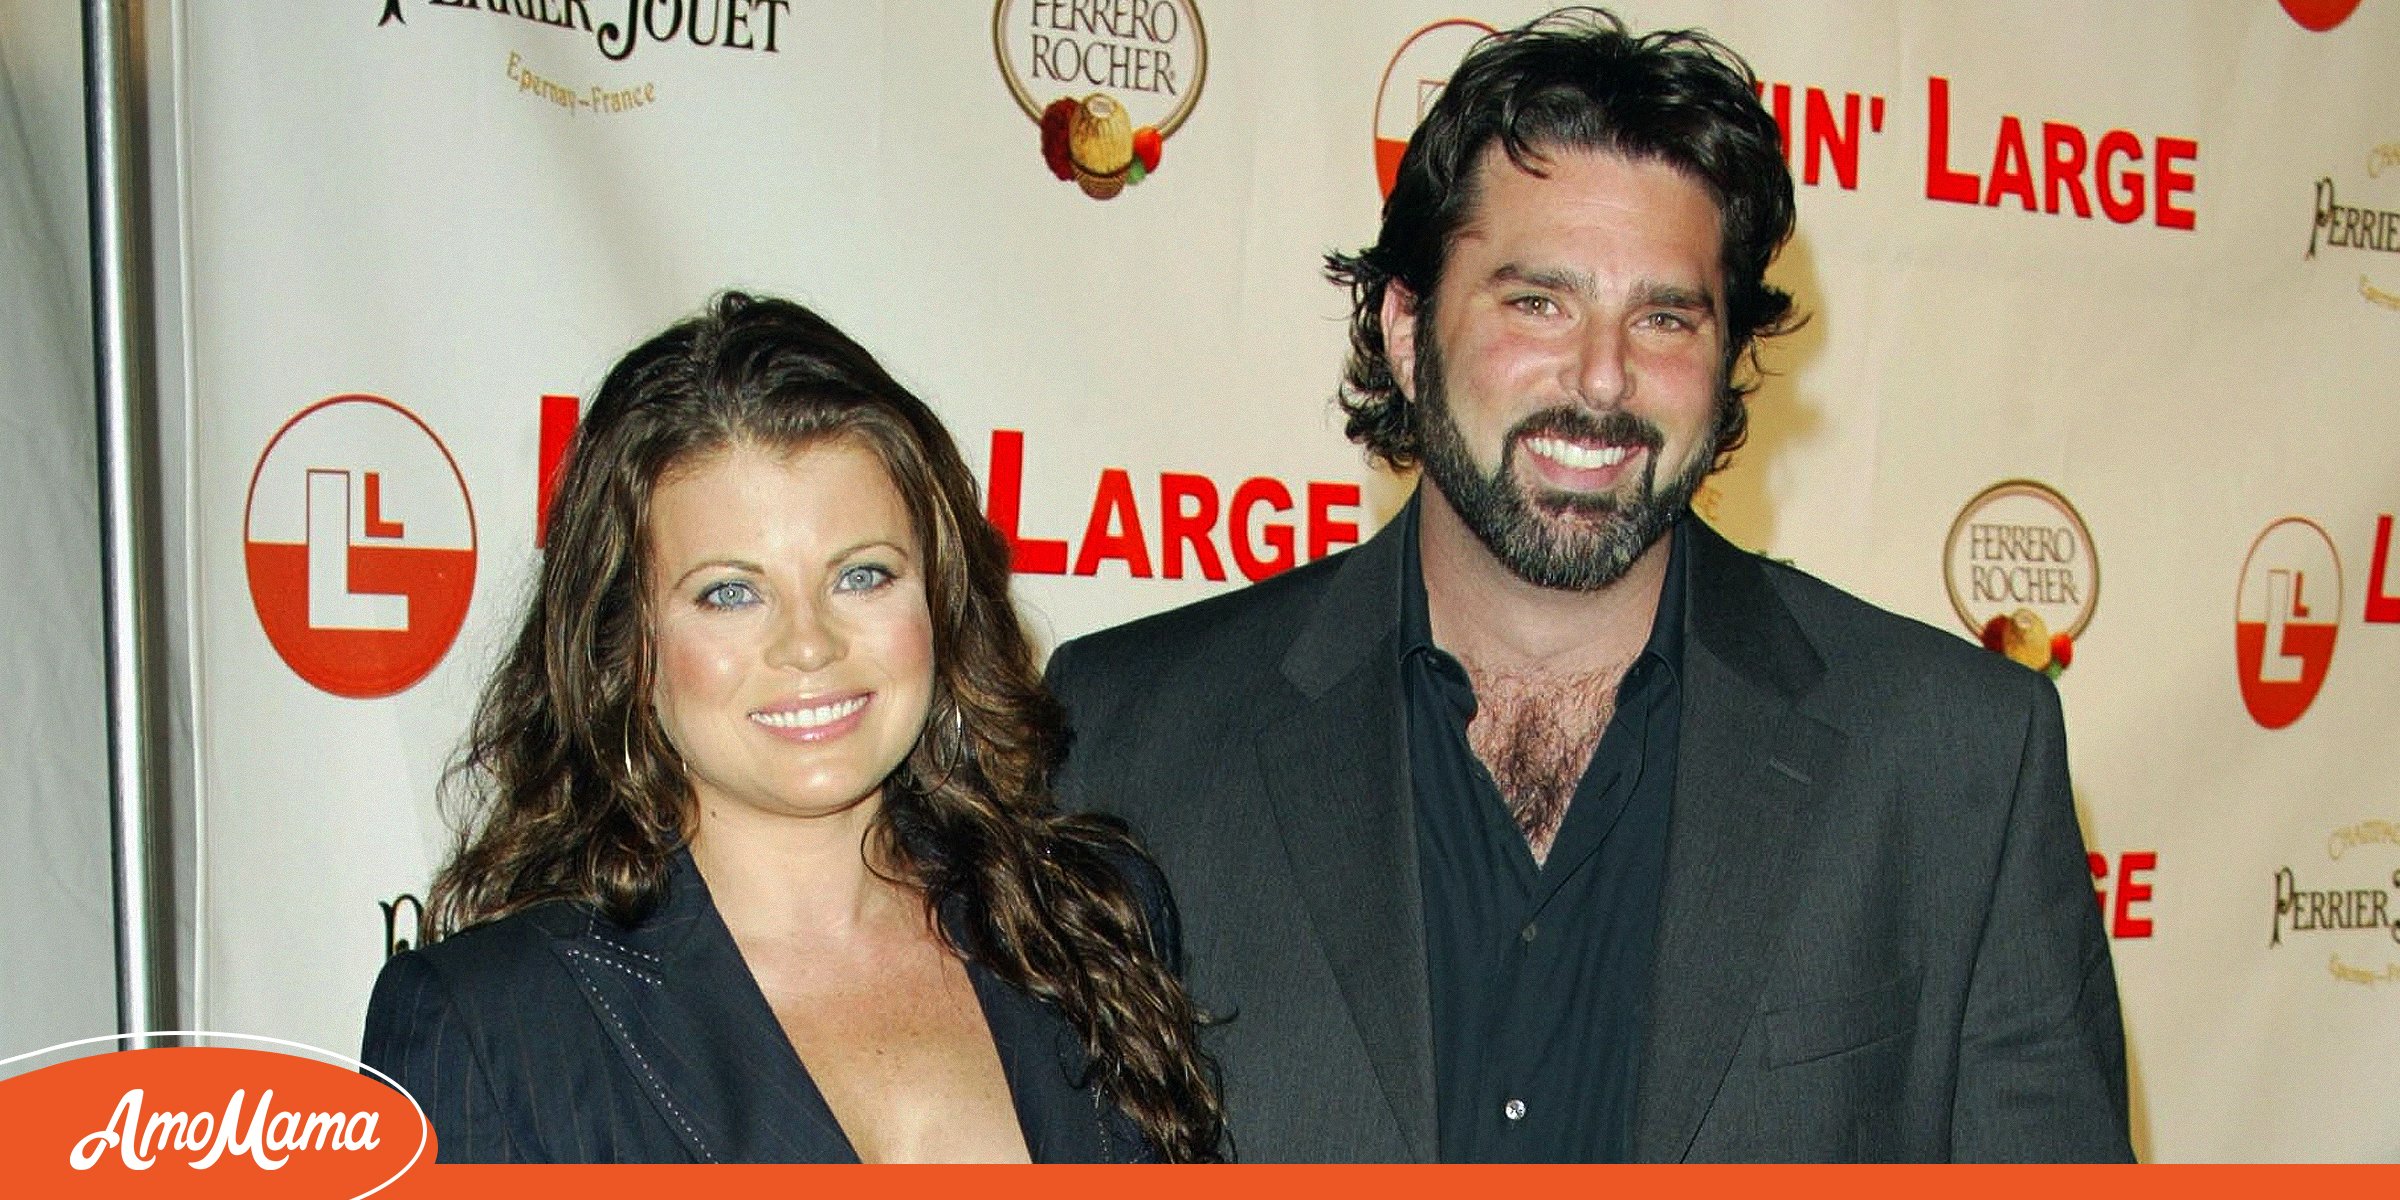 Paul Cerrito Is Yasmine Bleeth's Husband â€“ Facts about the Food Consultant